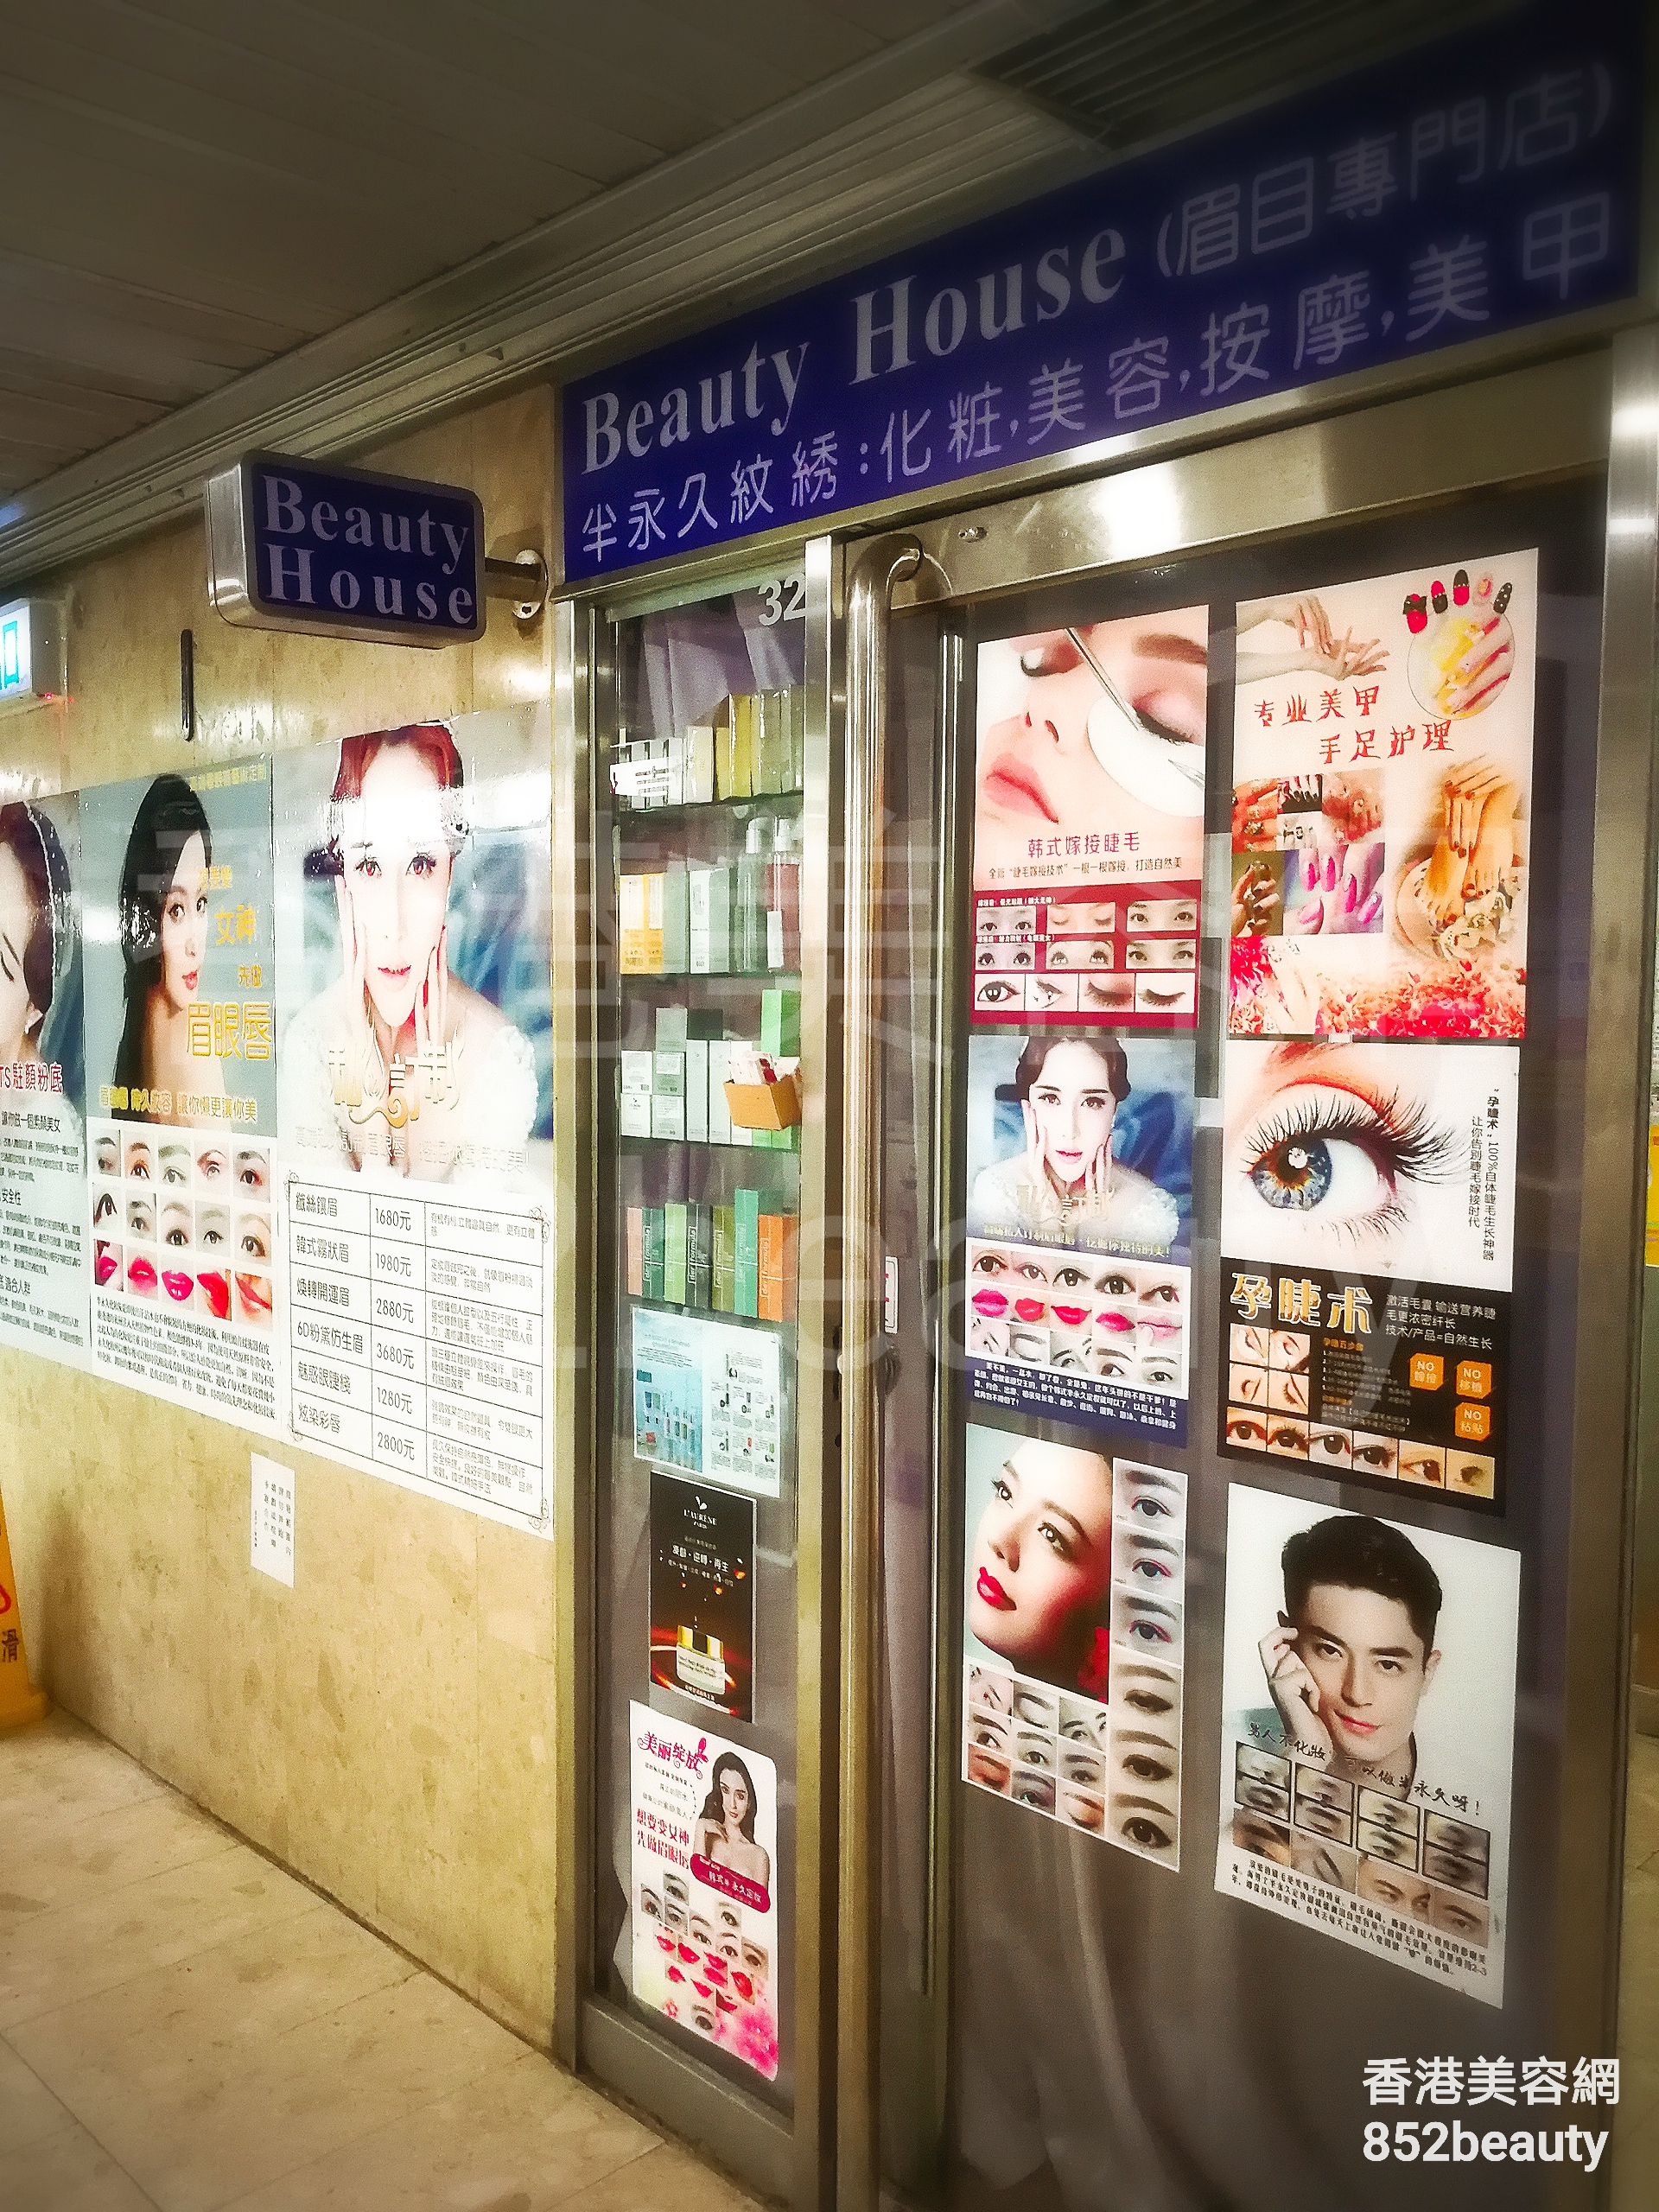 Hair Removal: Beauty house (眉目專門店)